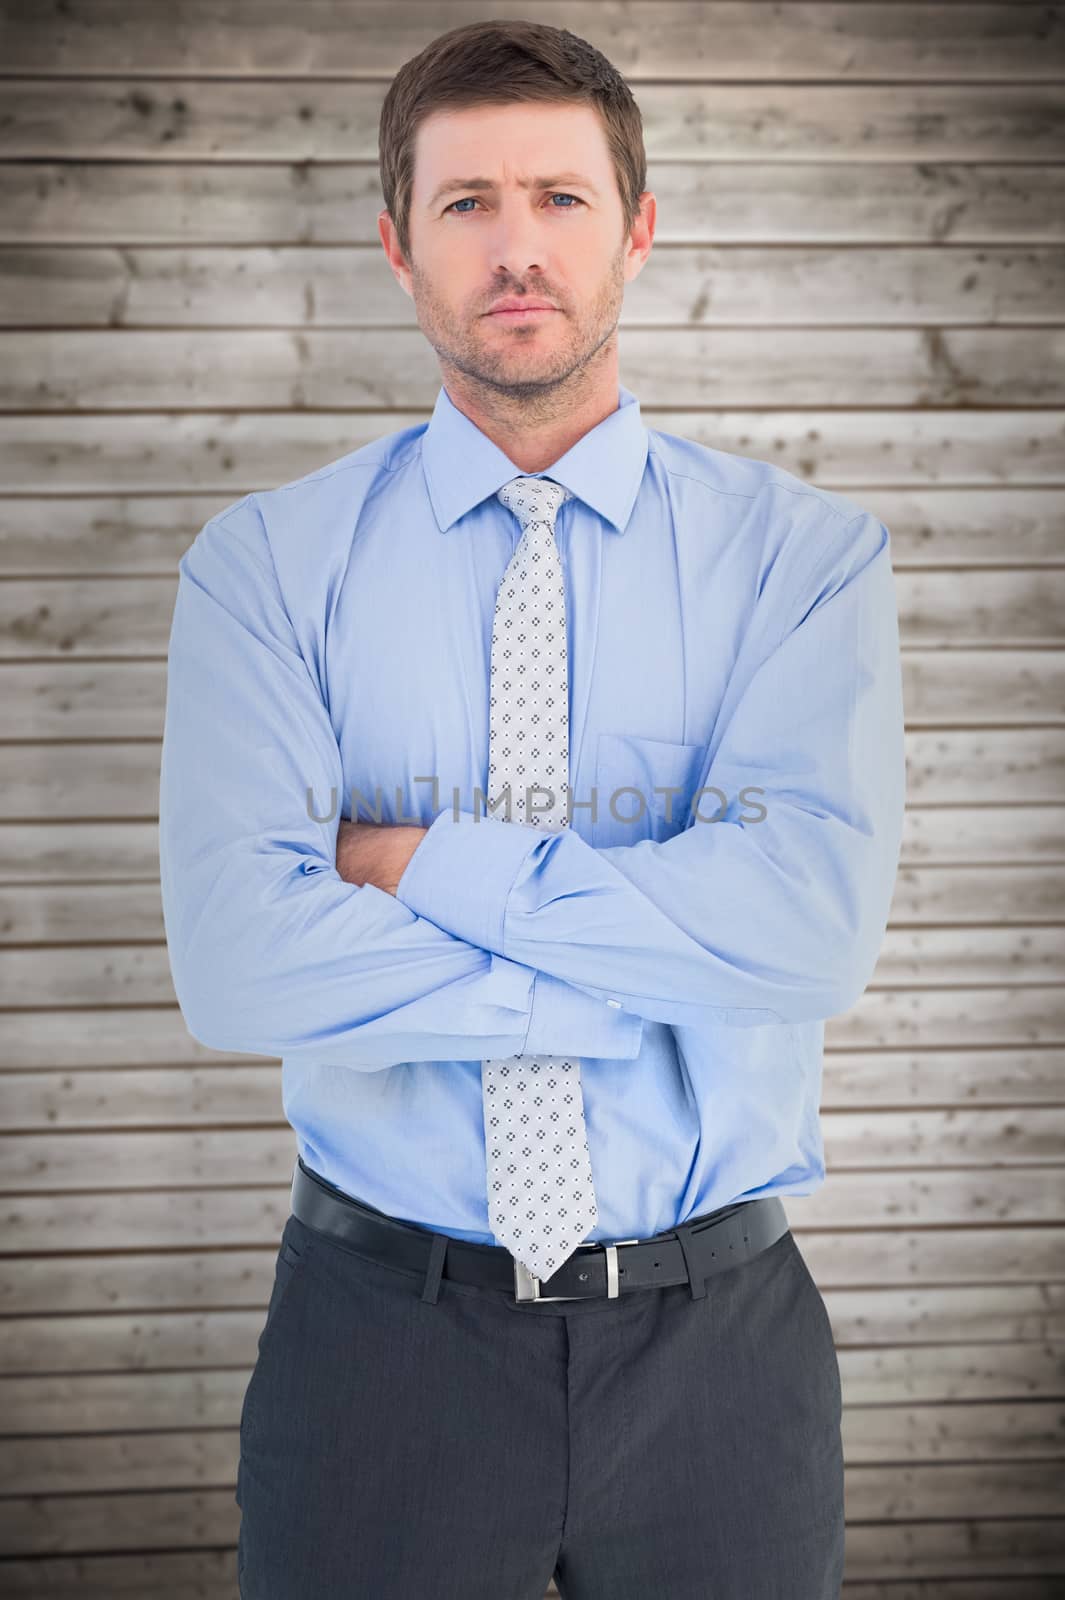 Businessman looking at the camera against wooden planks background